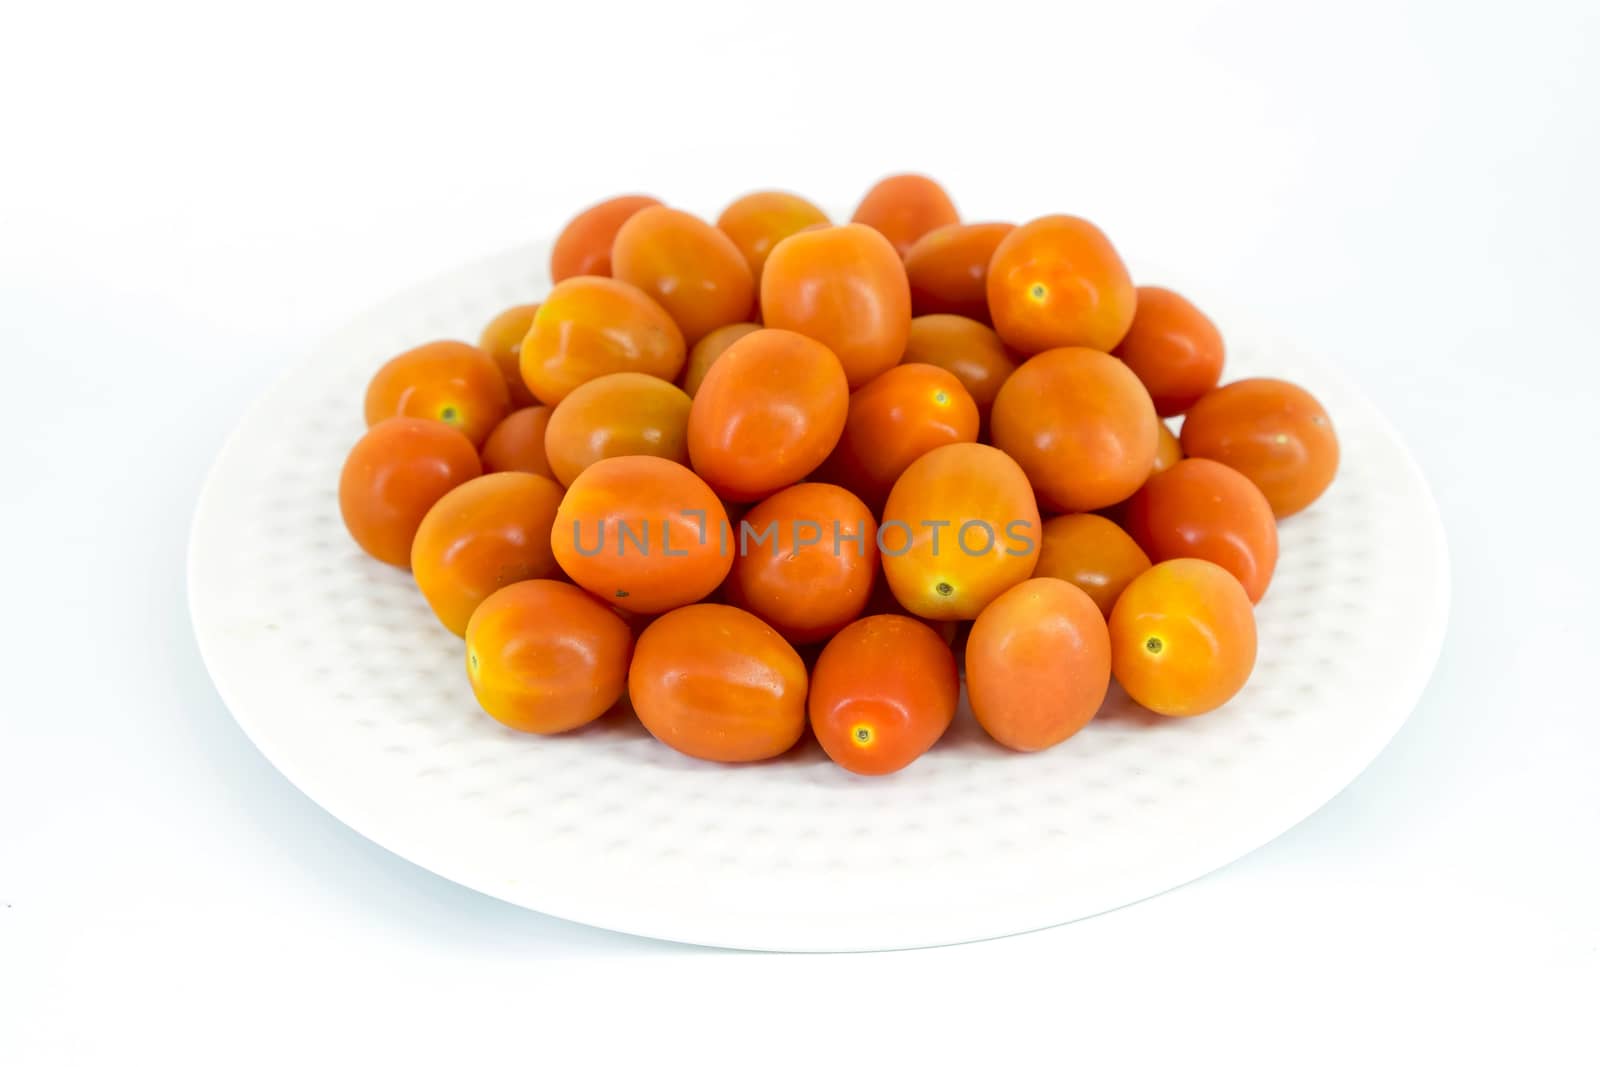 Cherry tomatoes in white plate by art9858